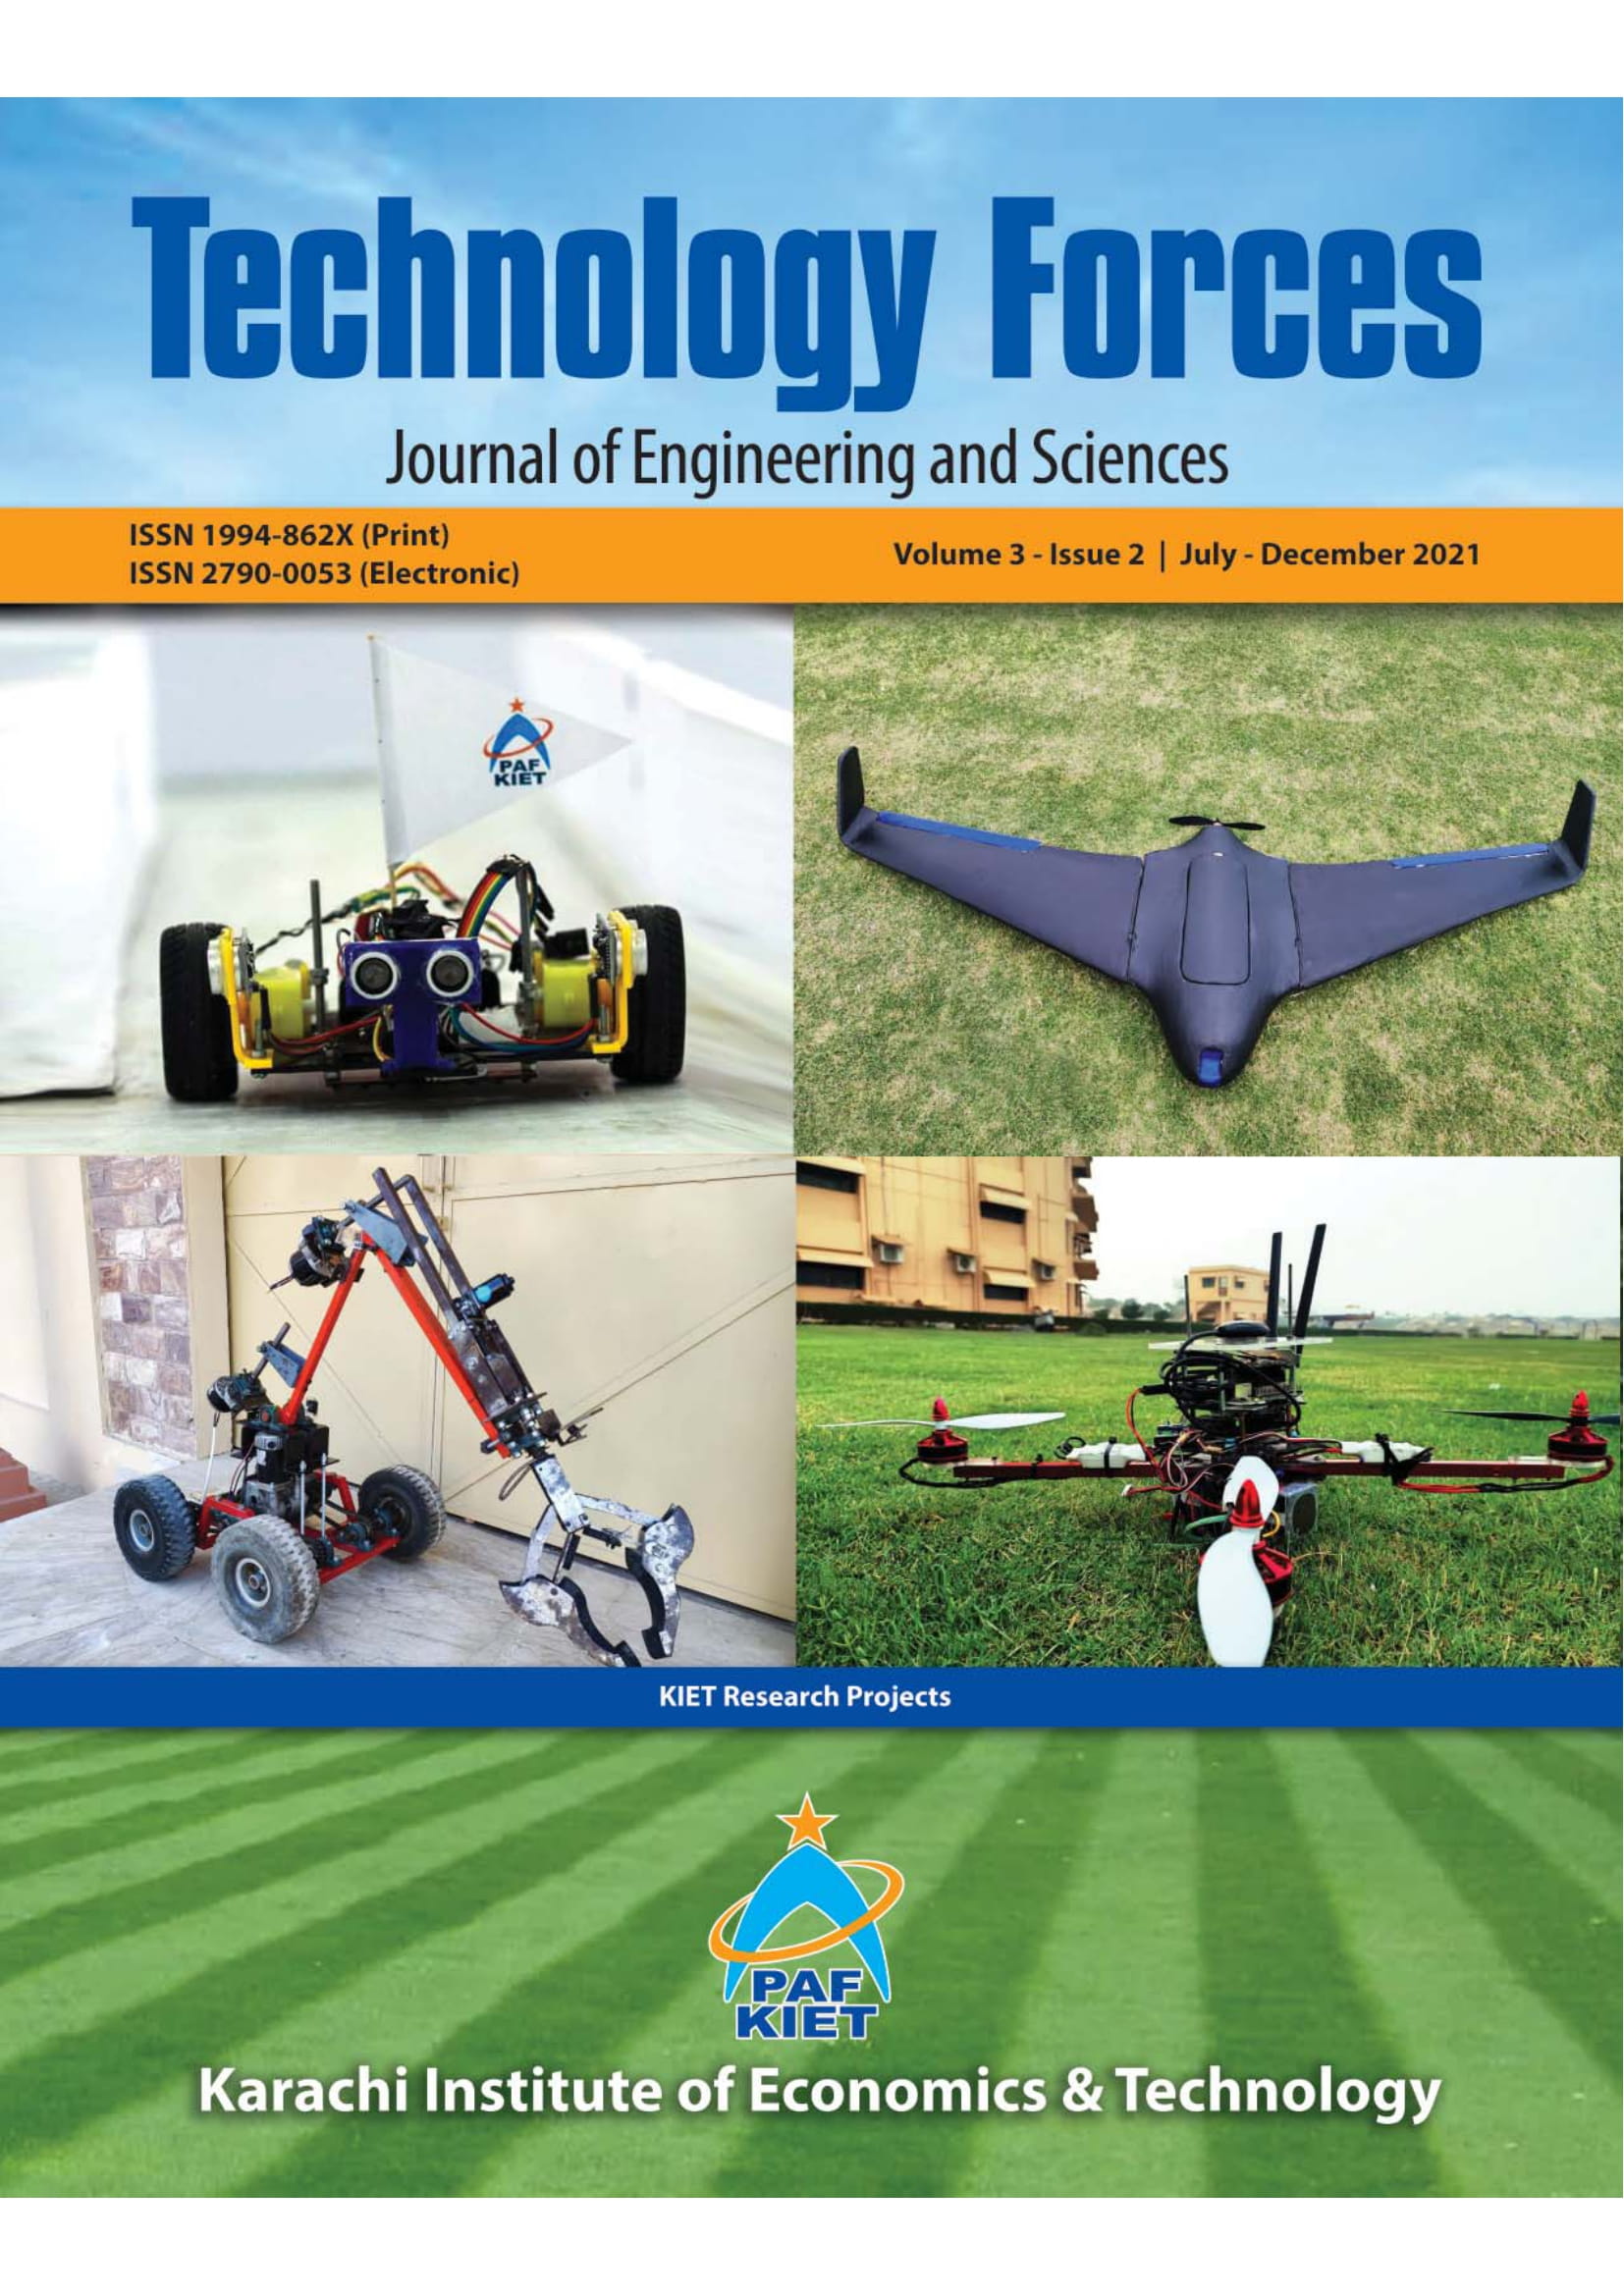 					View Vol. 3 No. 2 (2021): Vol. 3 No. 2 (2021): TECHNOLOGY FORCES JOURNAL OF ENGINEERING AND SCIENCES
				